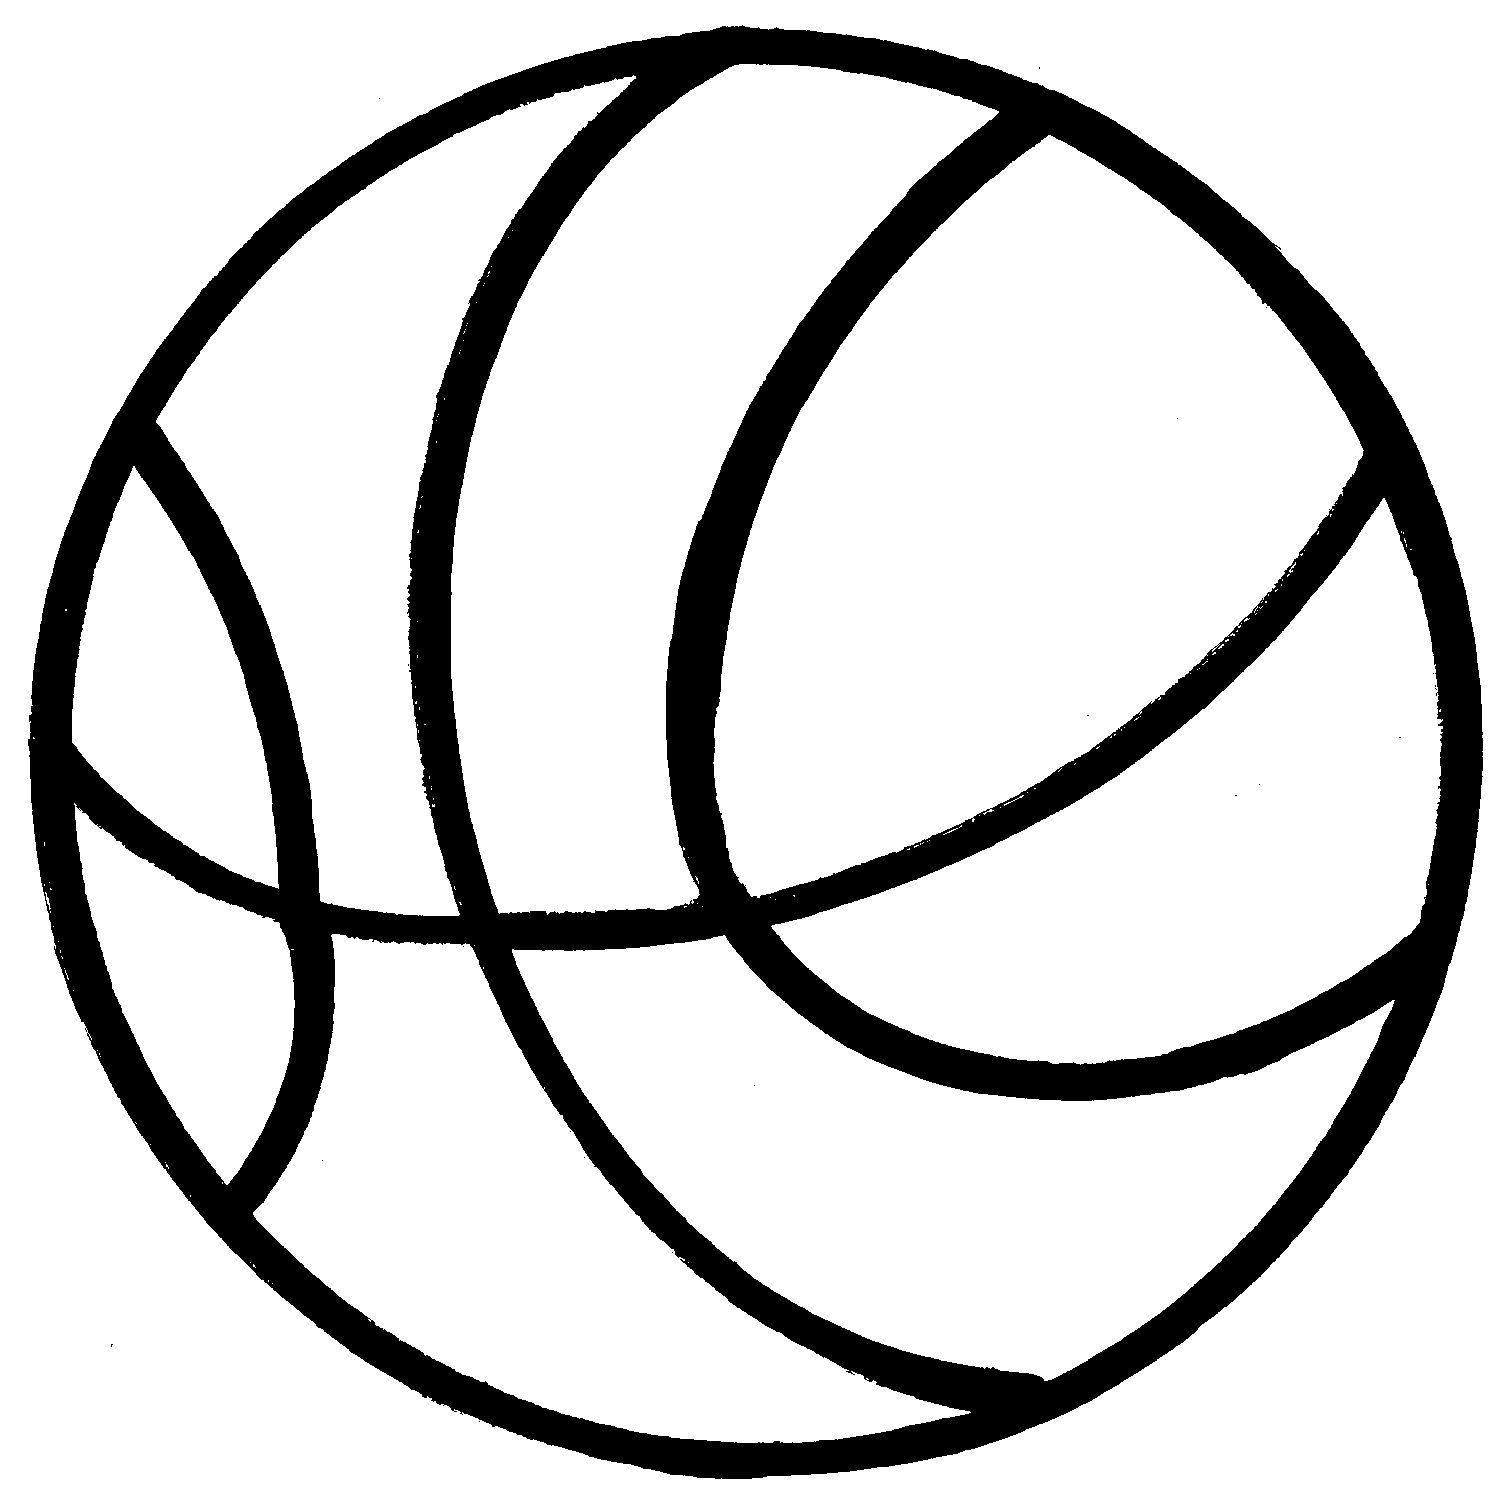 Black and White Basketball Logo - Free Black And White Basketball Picture, Download Free Clip Art